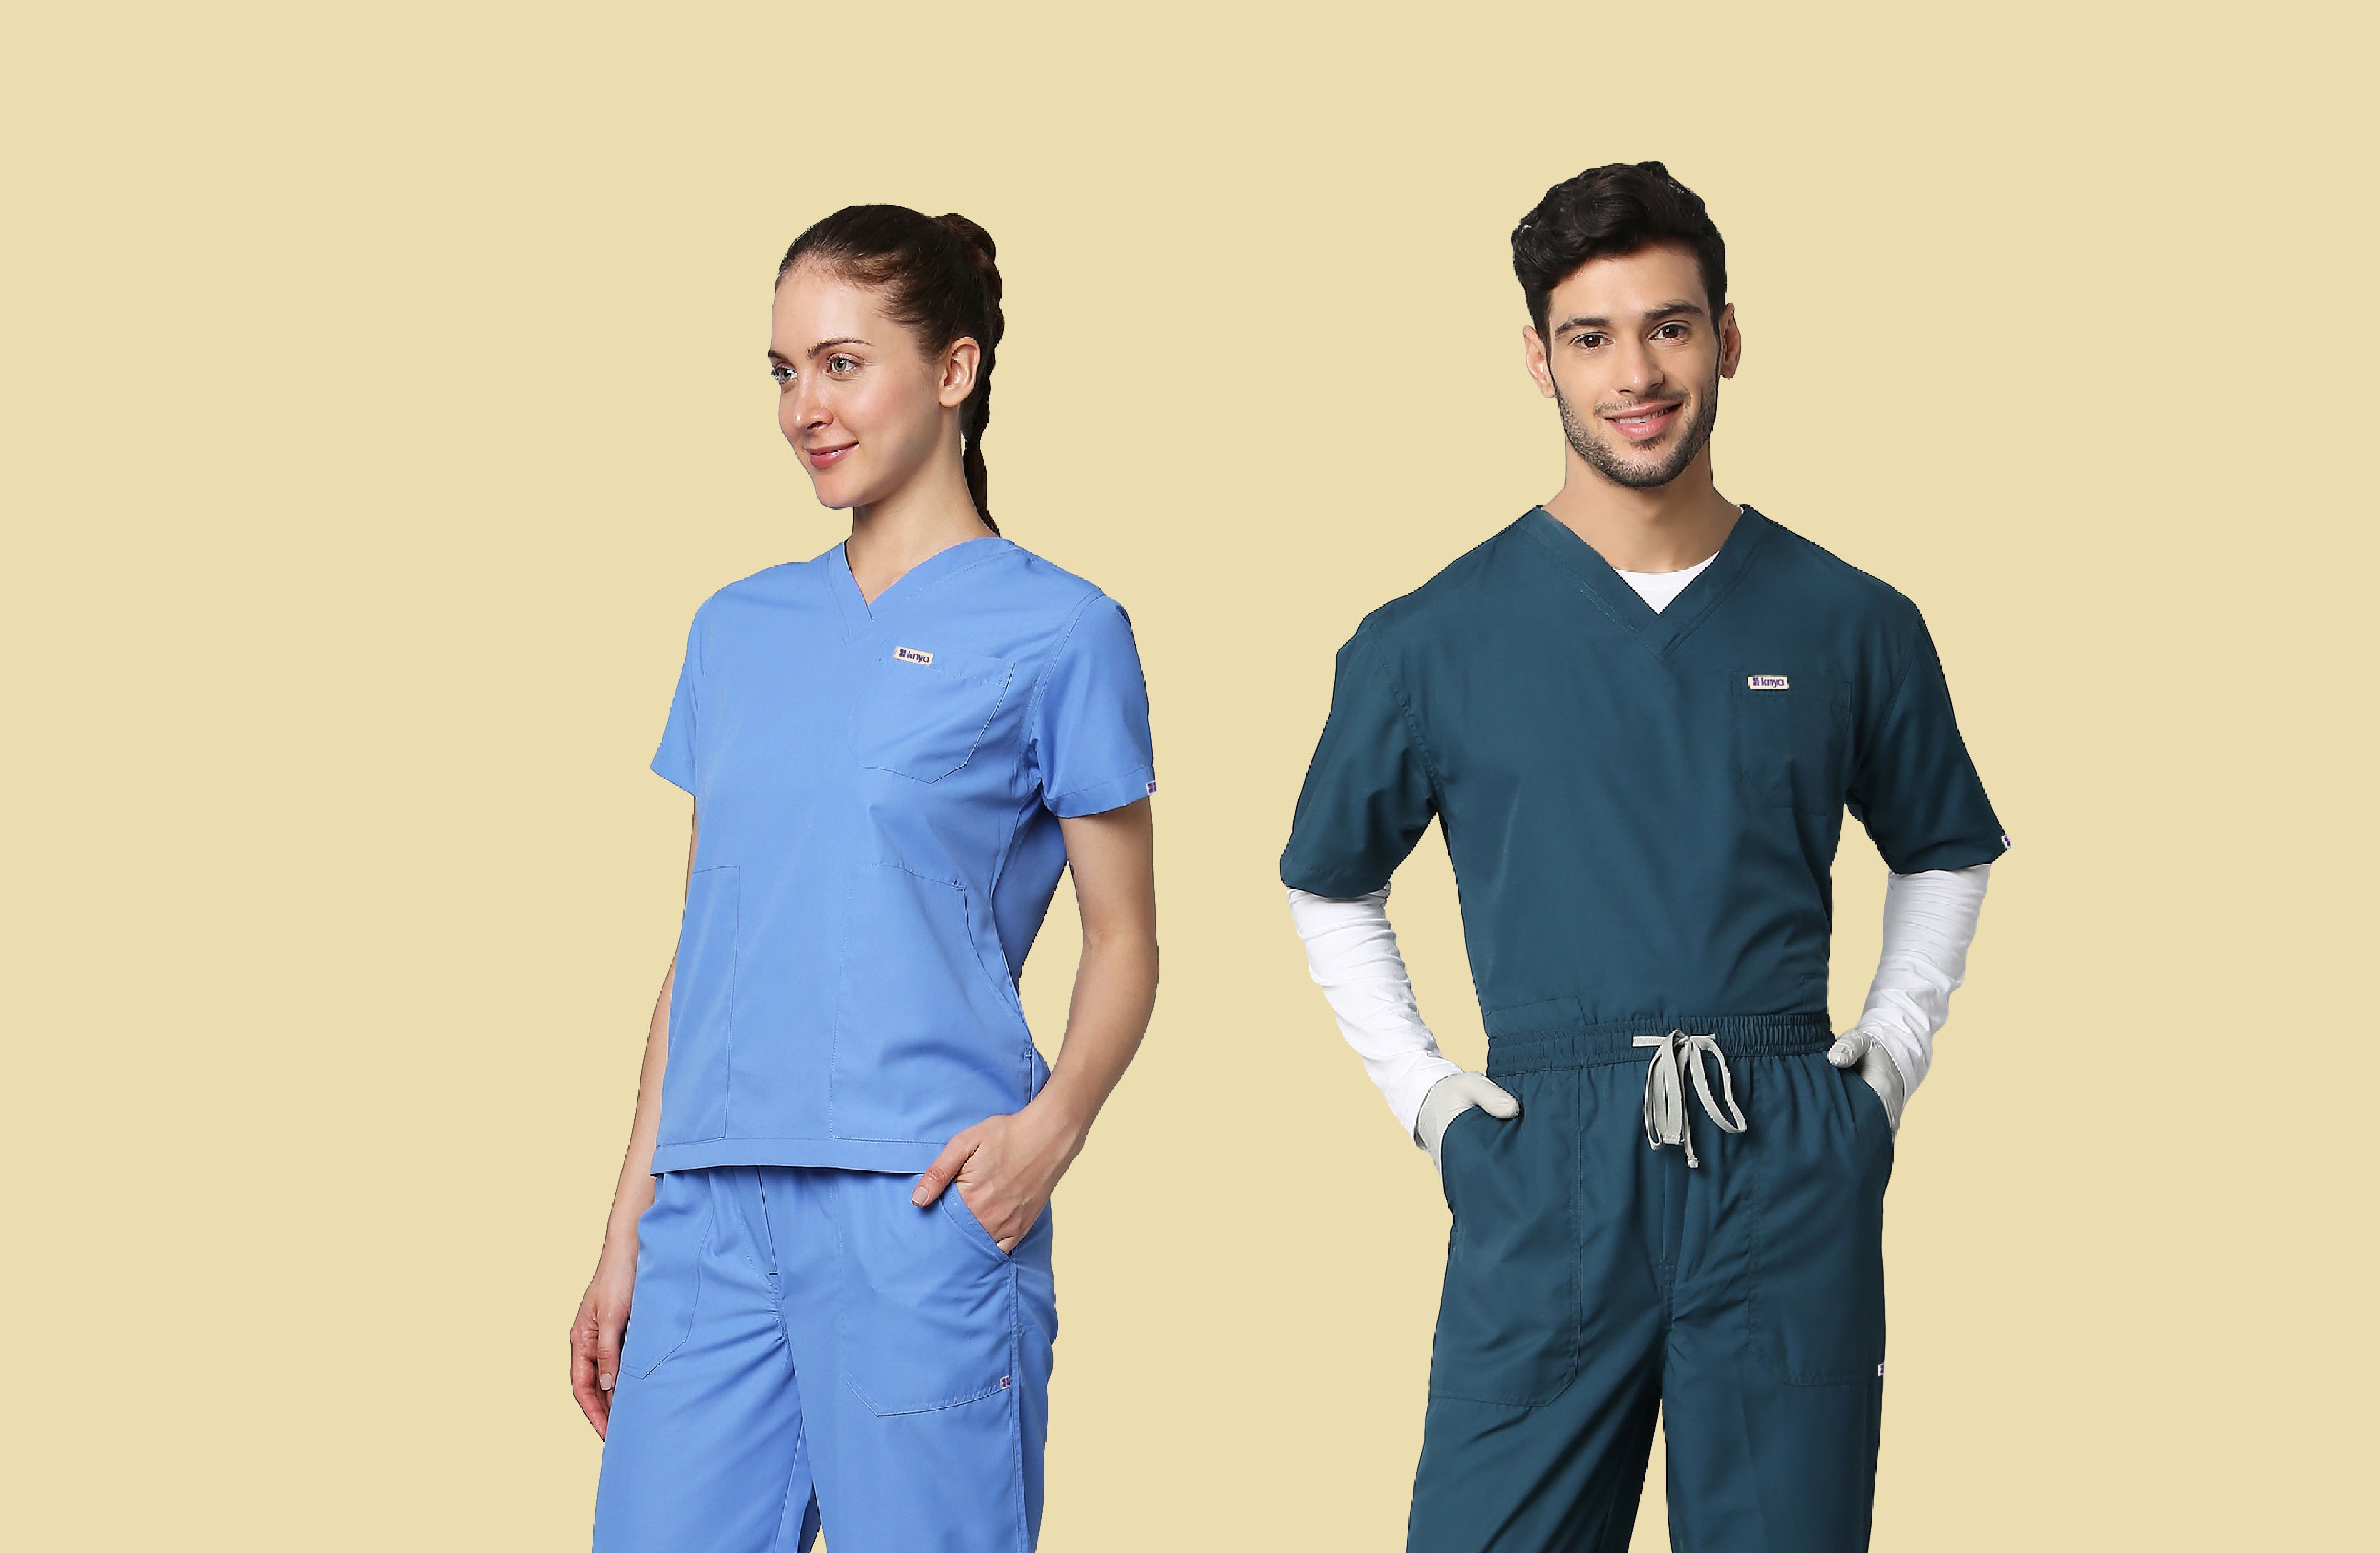 Doctor Scrubs - Check out our super soft stretch scrubs!